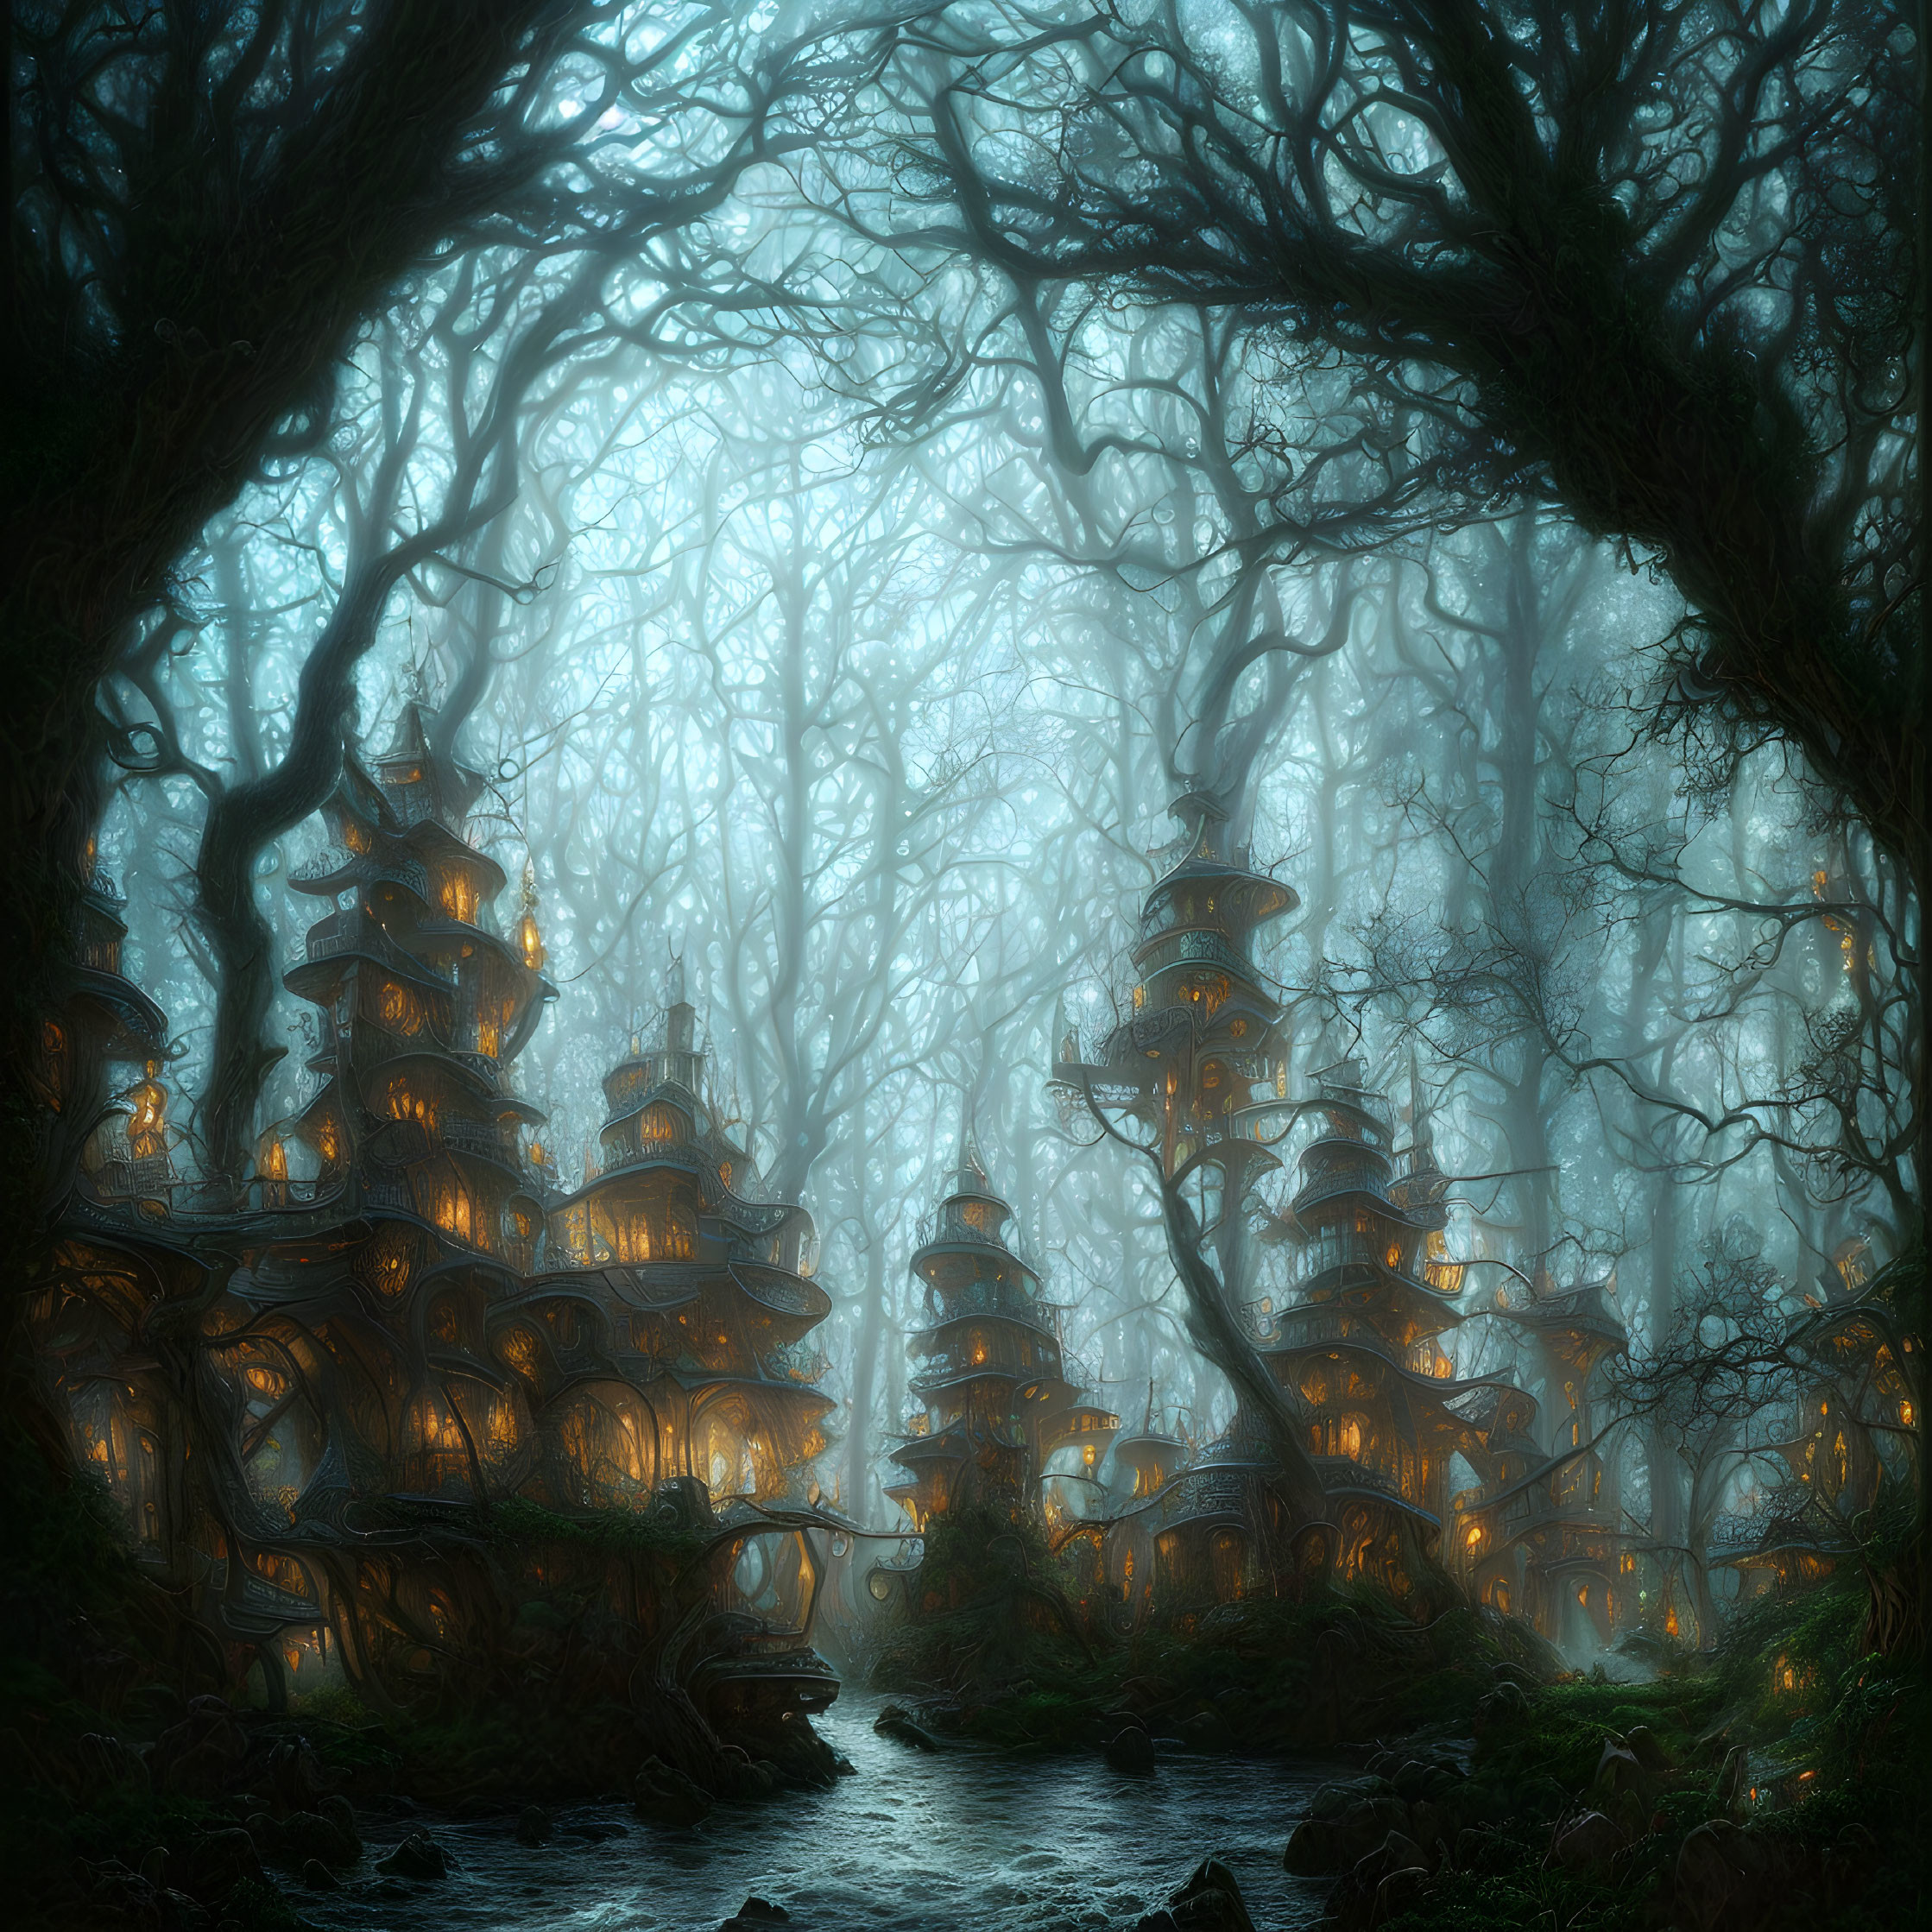 Enchanting forest with tiered treehouses, fog, and river